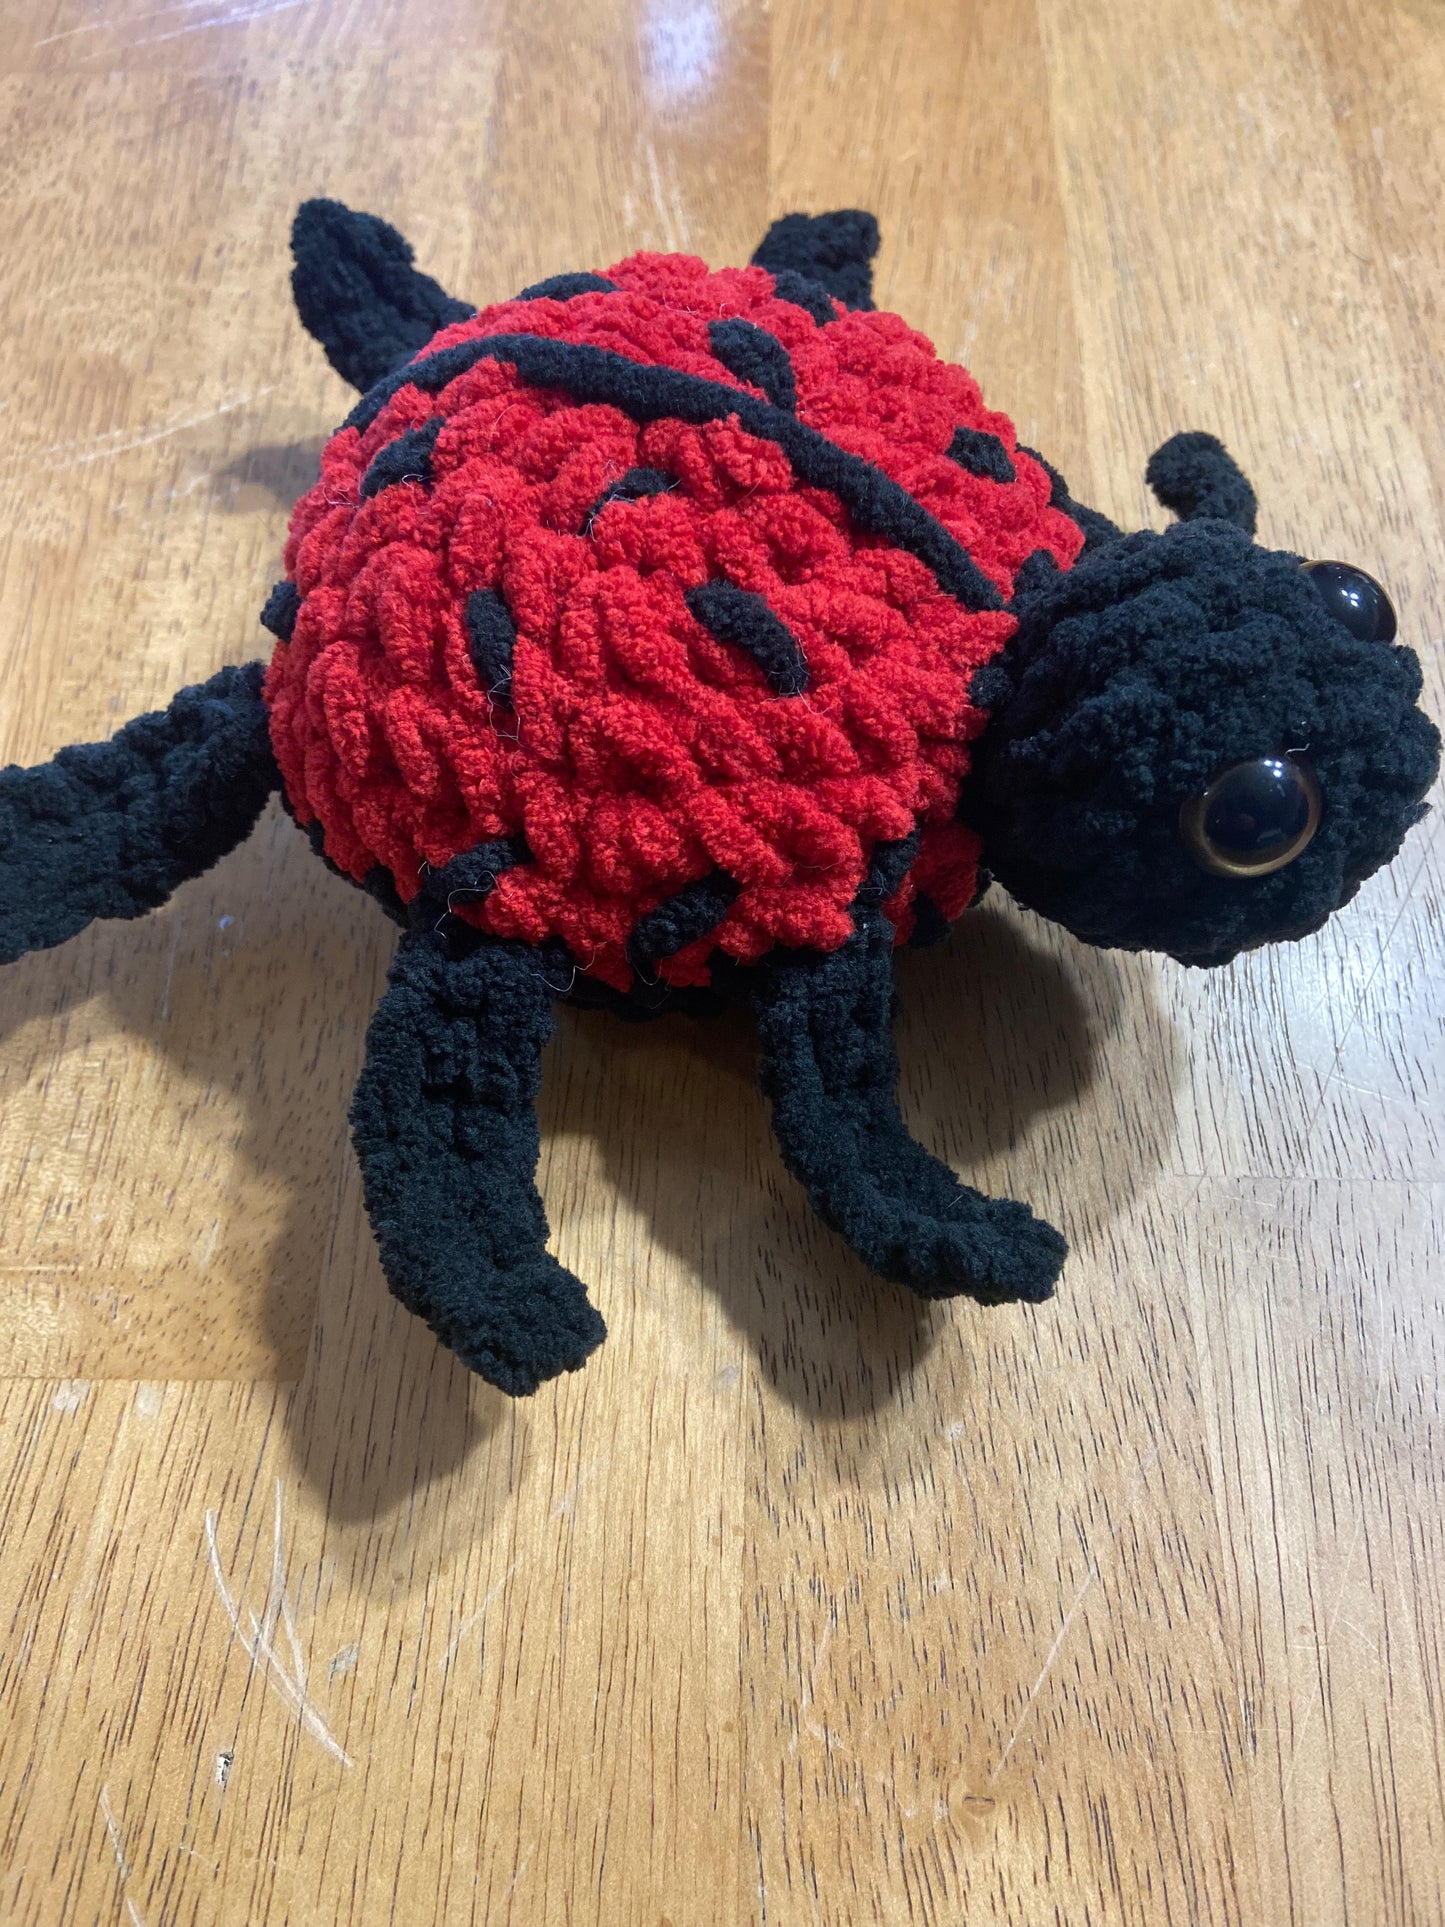 Handmade crochet ladybug plush toy with vibrant colors and intricate detailing.